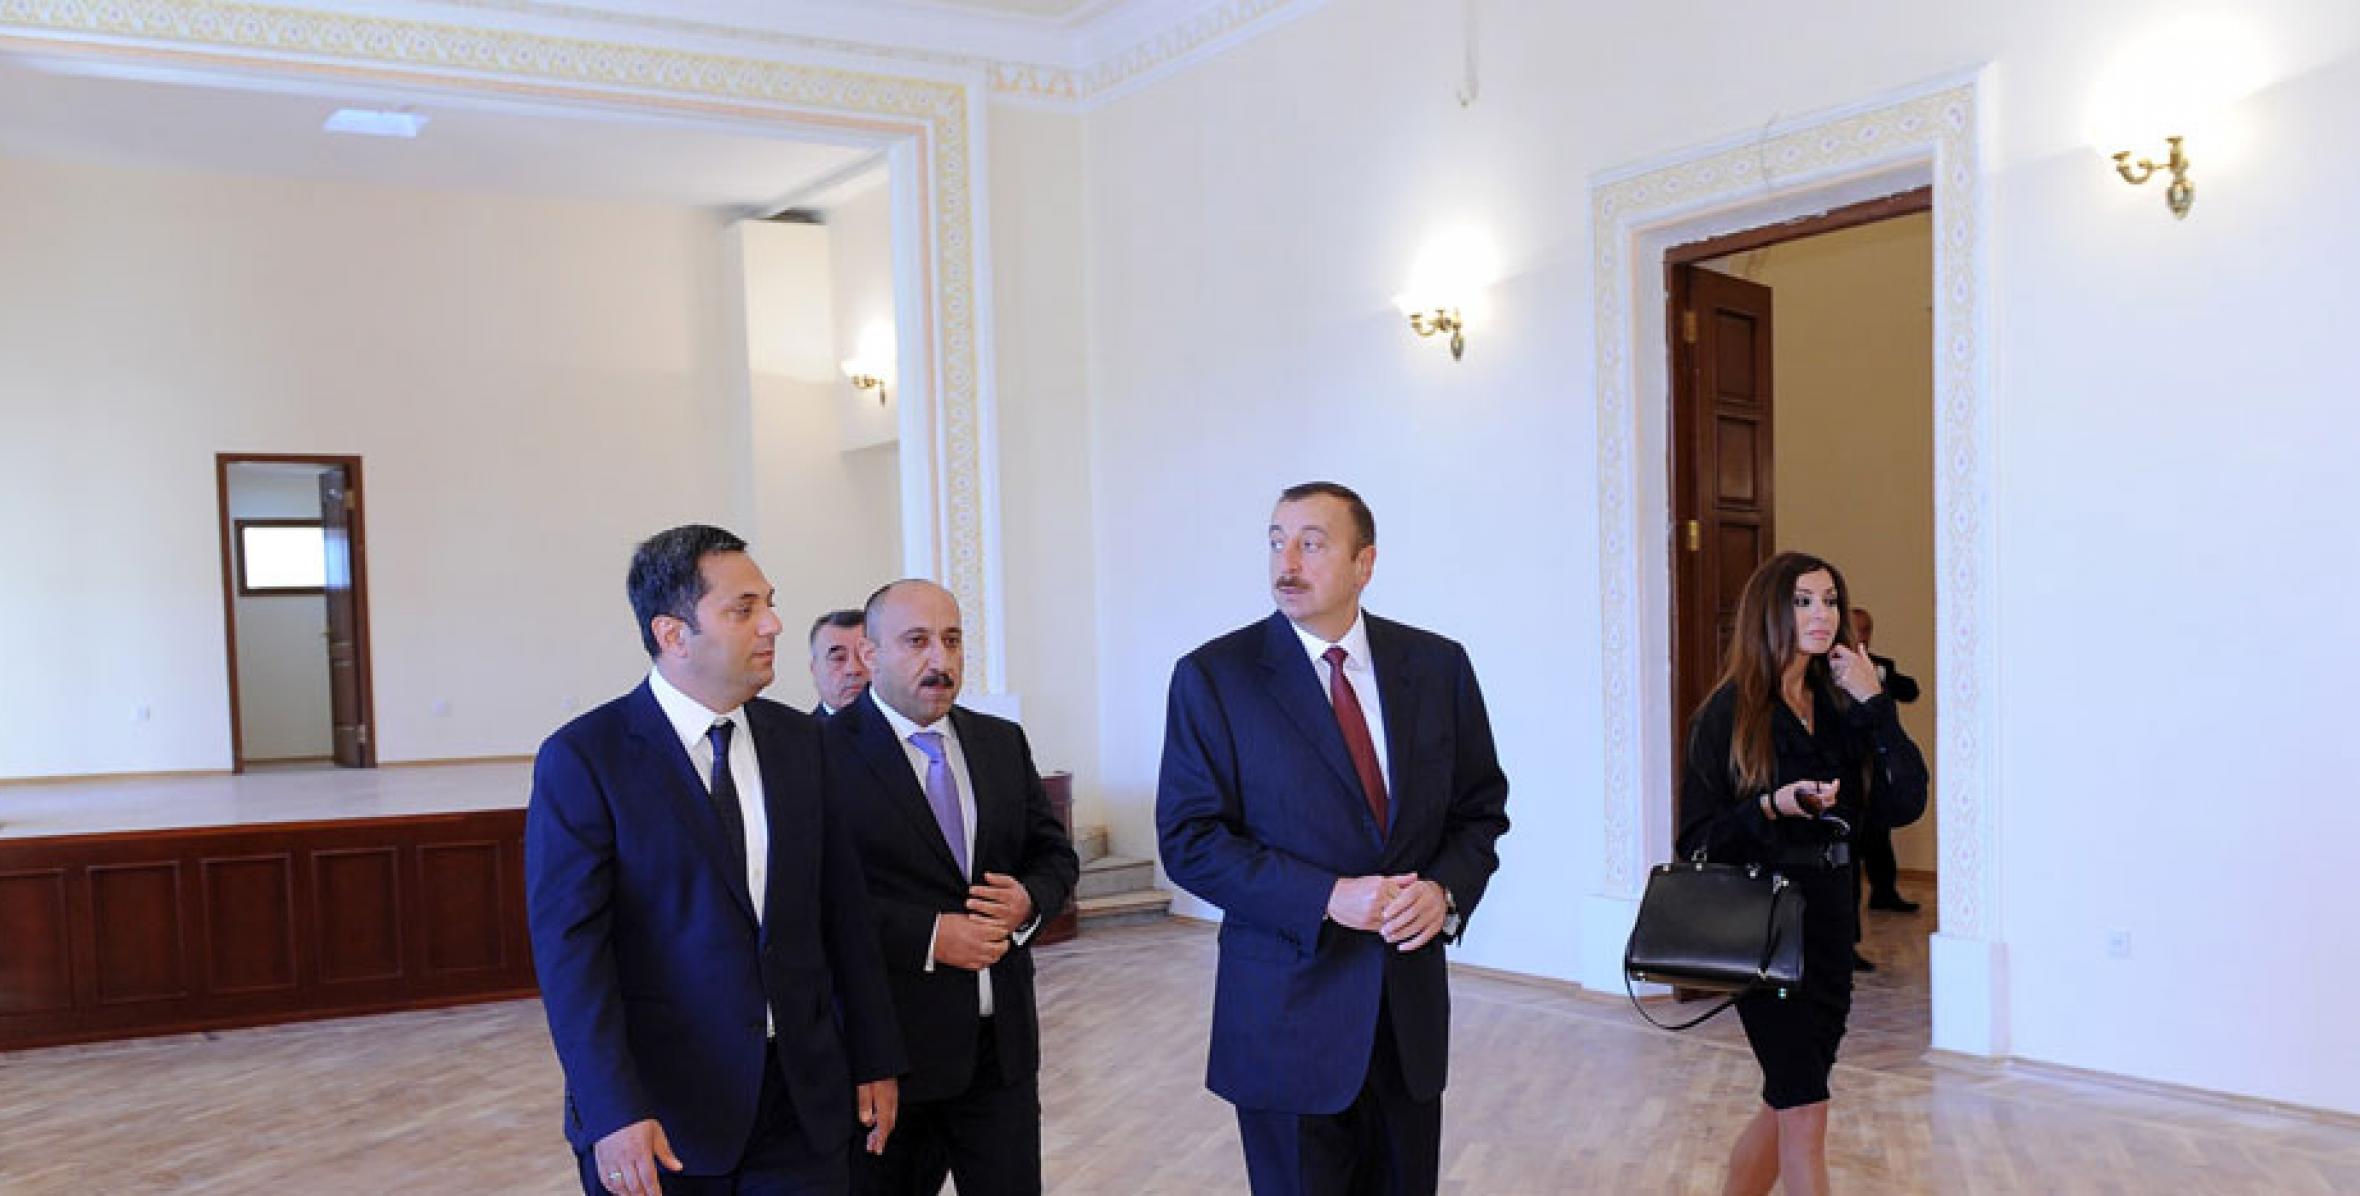 Ilham Aliyev checked out the reconstruction works carried out in the building of the Mingachevir State Drama Theatre